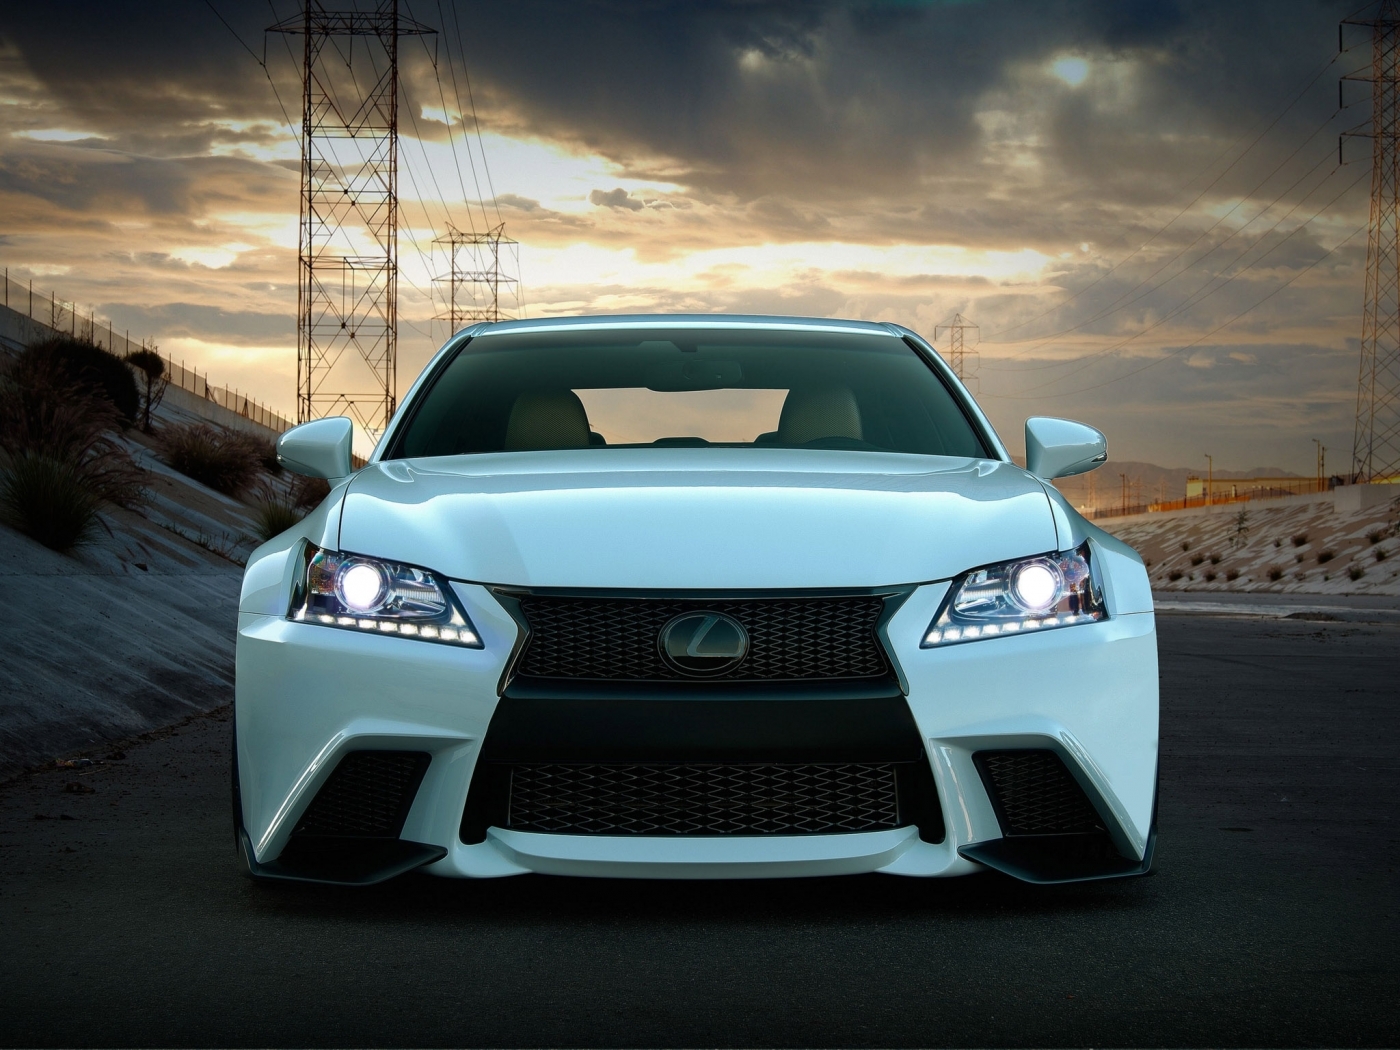 lexus, transport, auto cell phone wallpapers